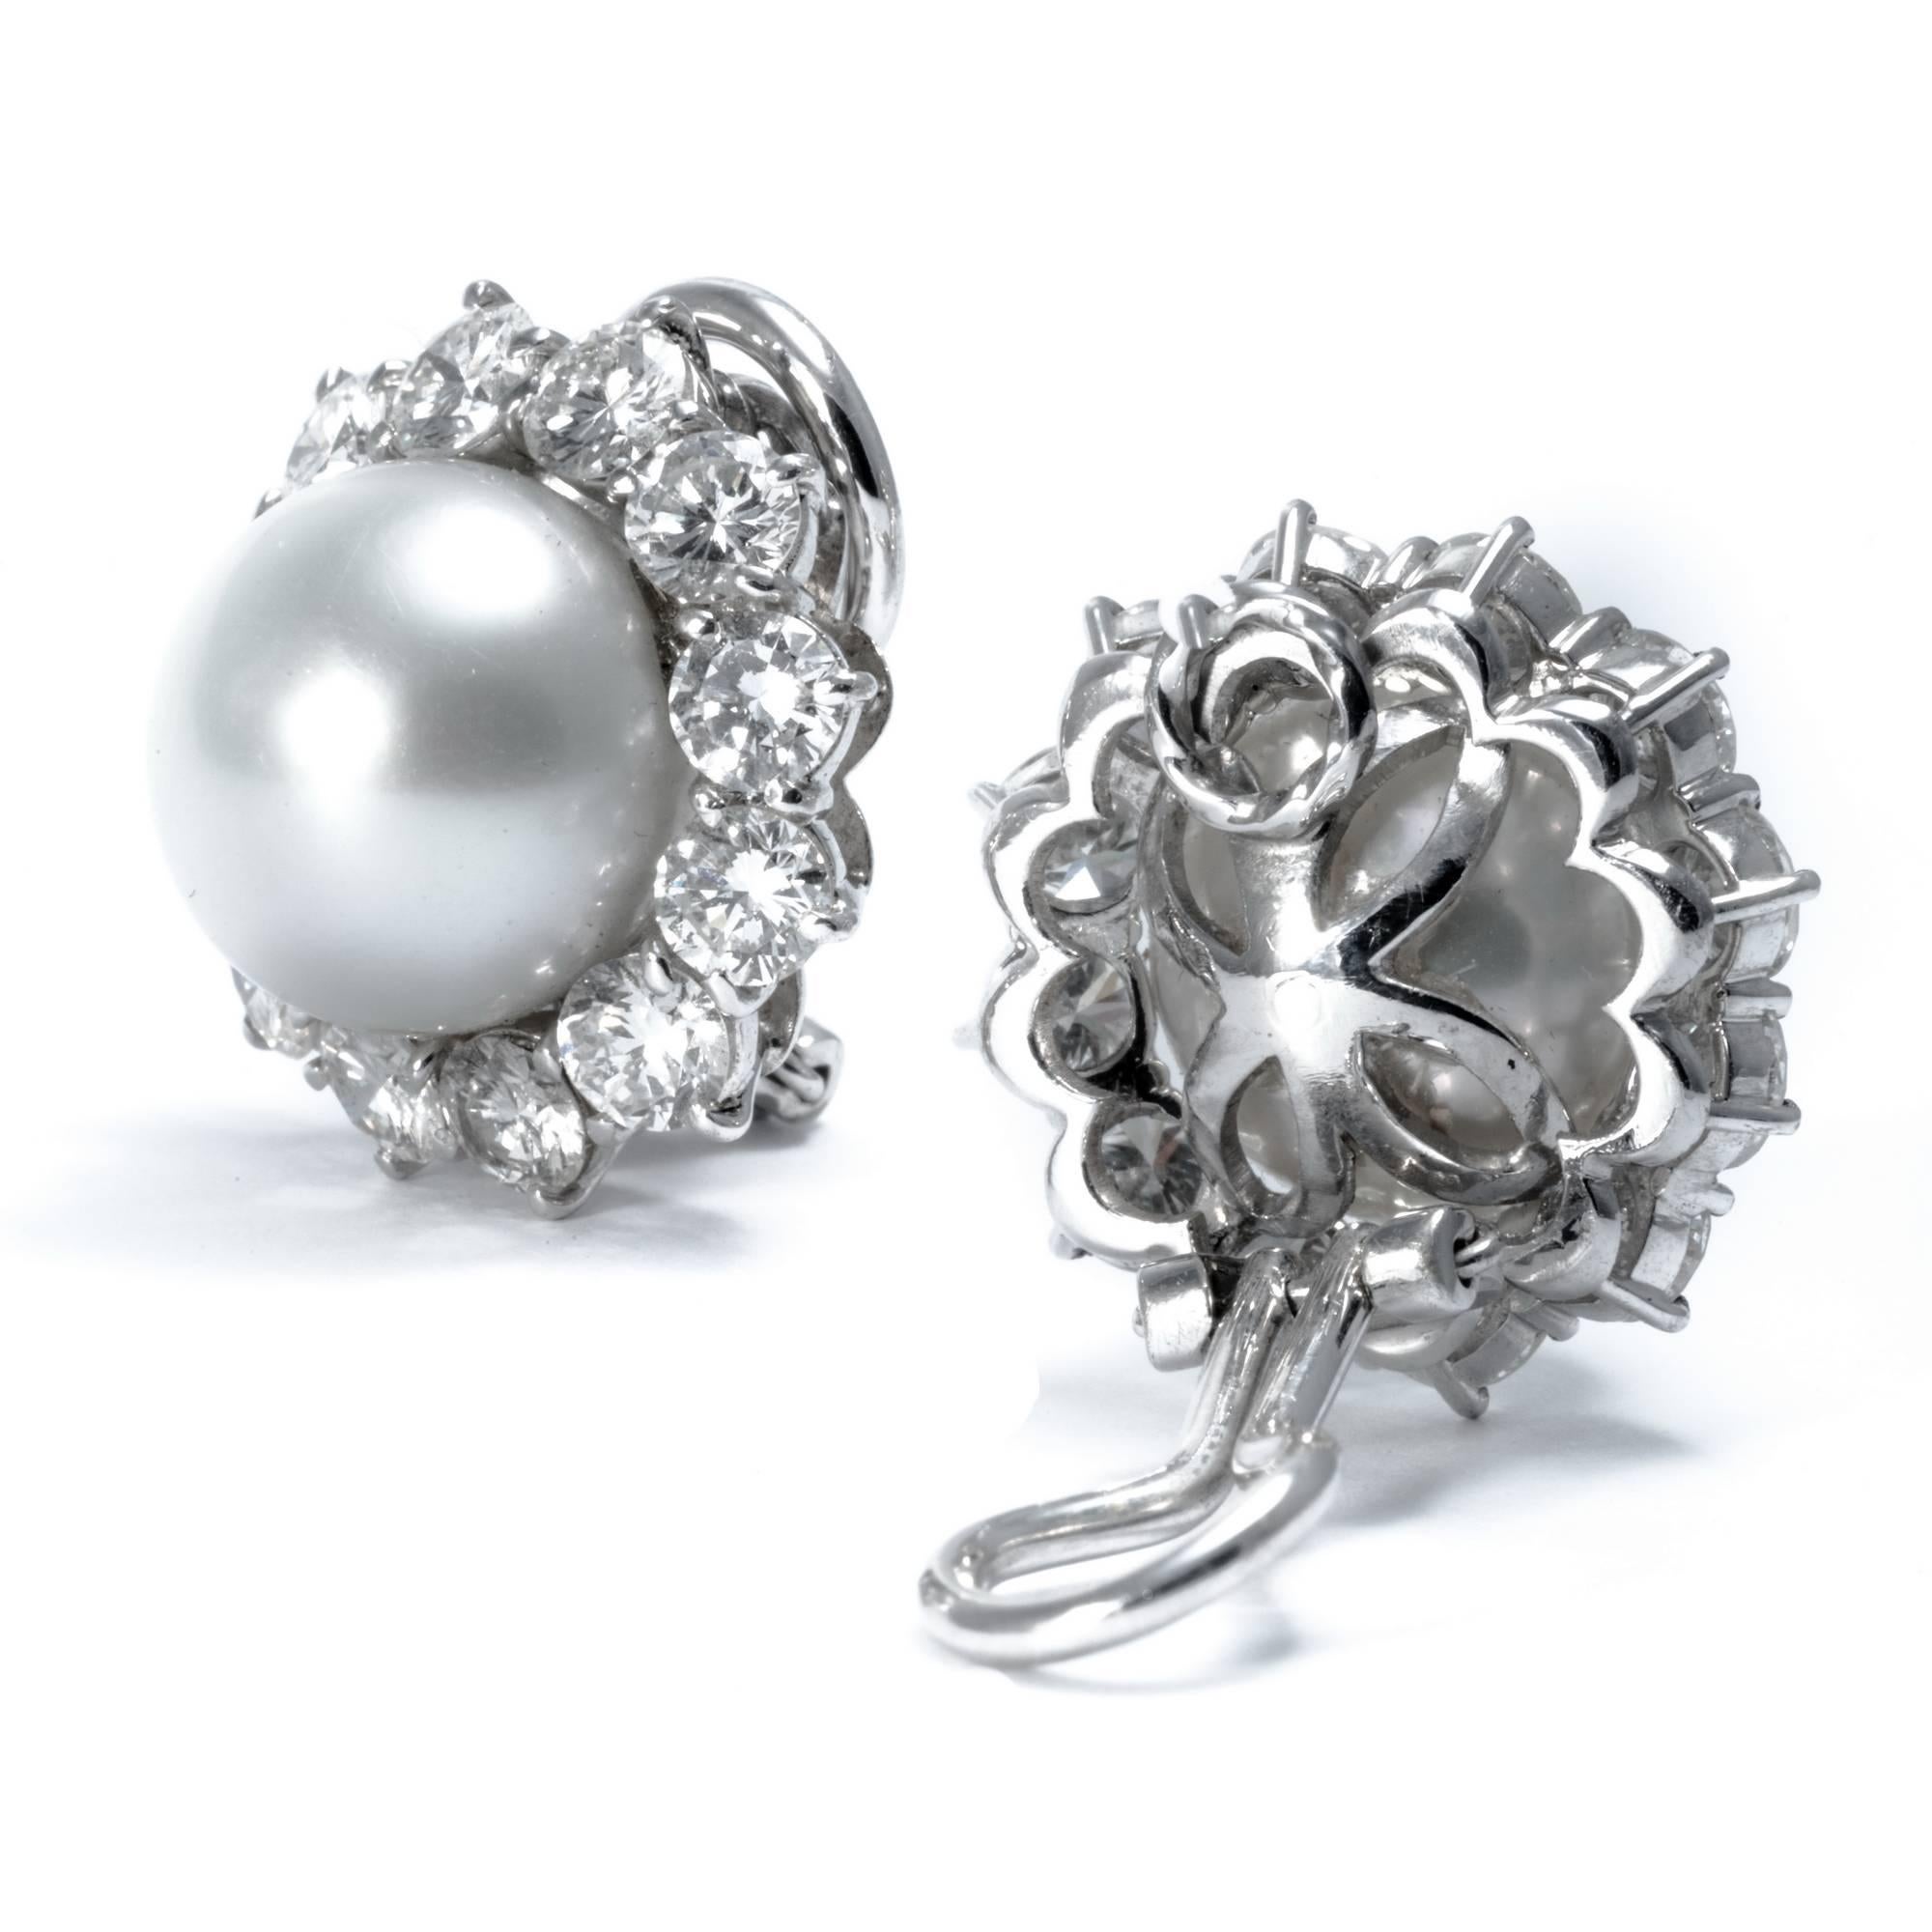  These stunning clip-on earrings feature 24 extra-white diamonds weighing approximately carats 4.50 and 2 natural highly cultivated Australian pearls diameter 12mm. Hand-crafted in 1960 by Ansuini in platinum, they are representative of the 